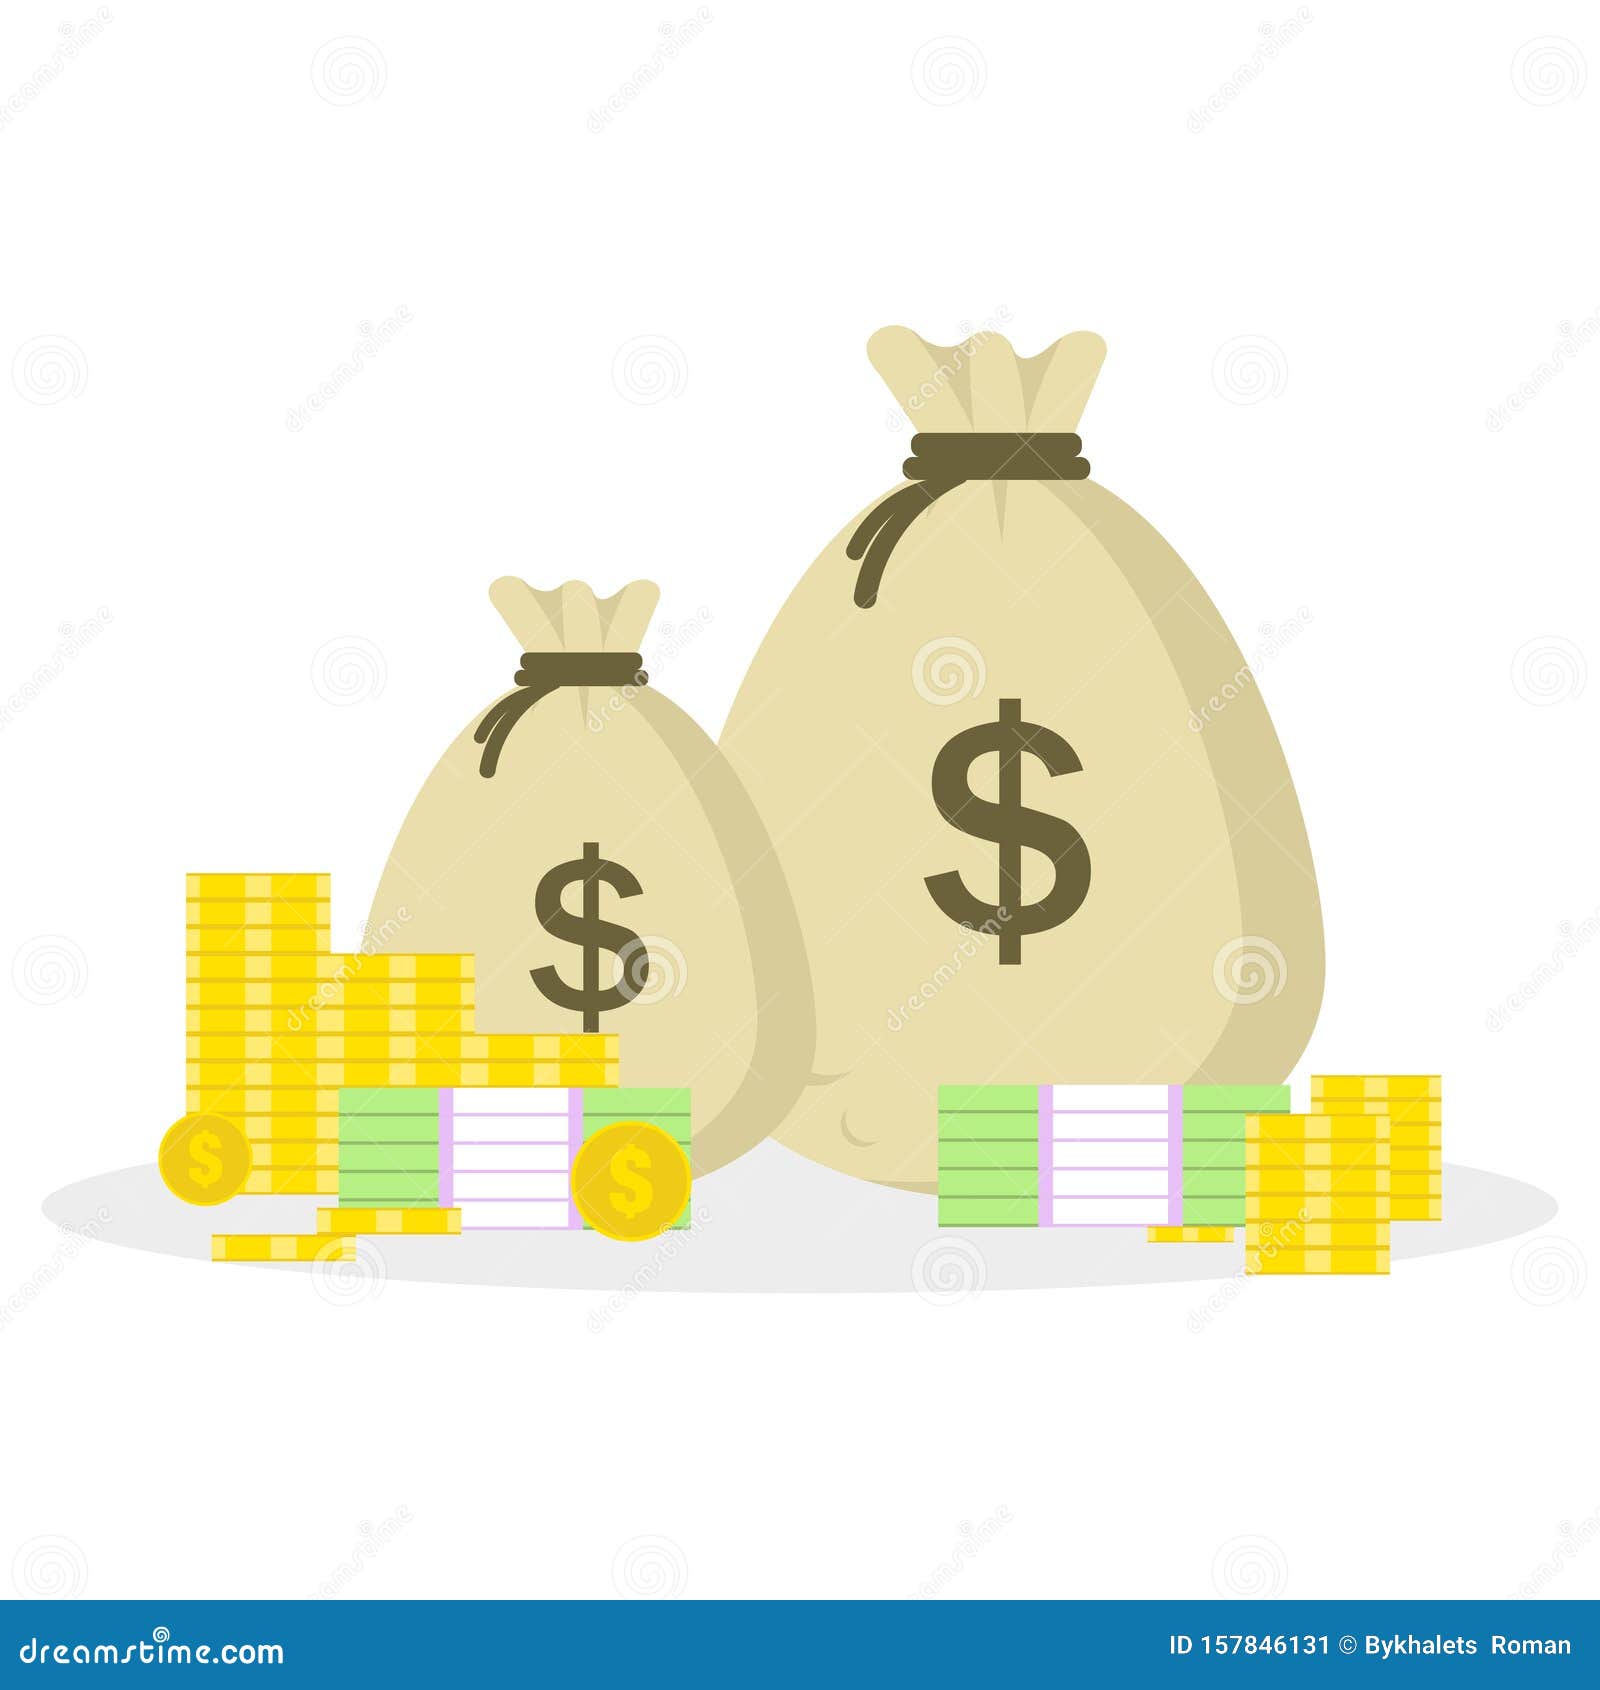  icon of money bags with shadow dollar sign full of money bags dollar grey color succes bussines excellent profit golden